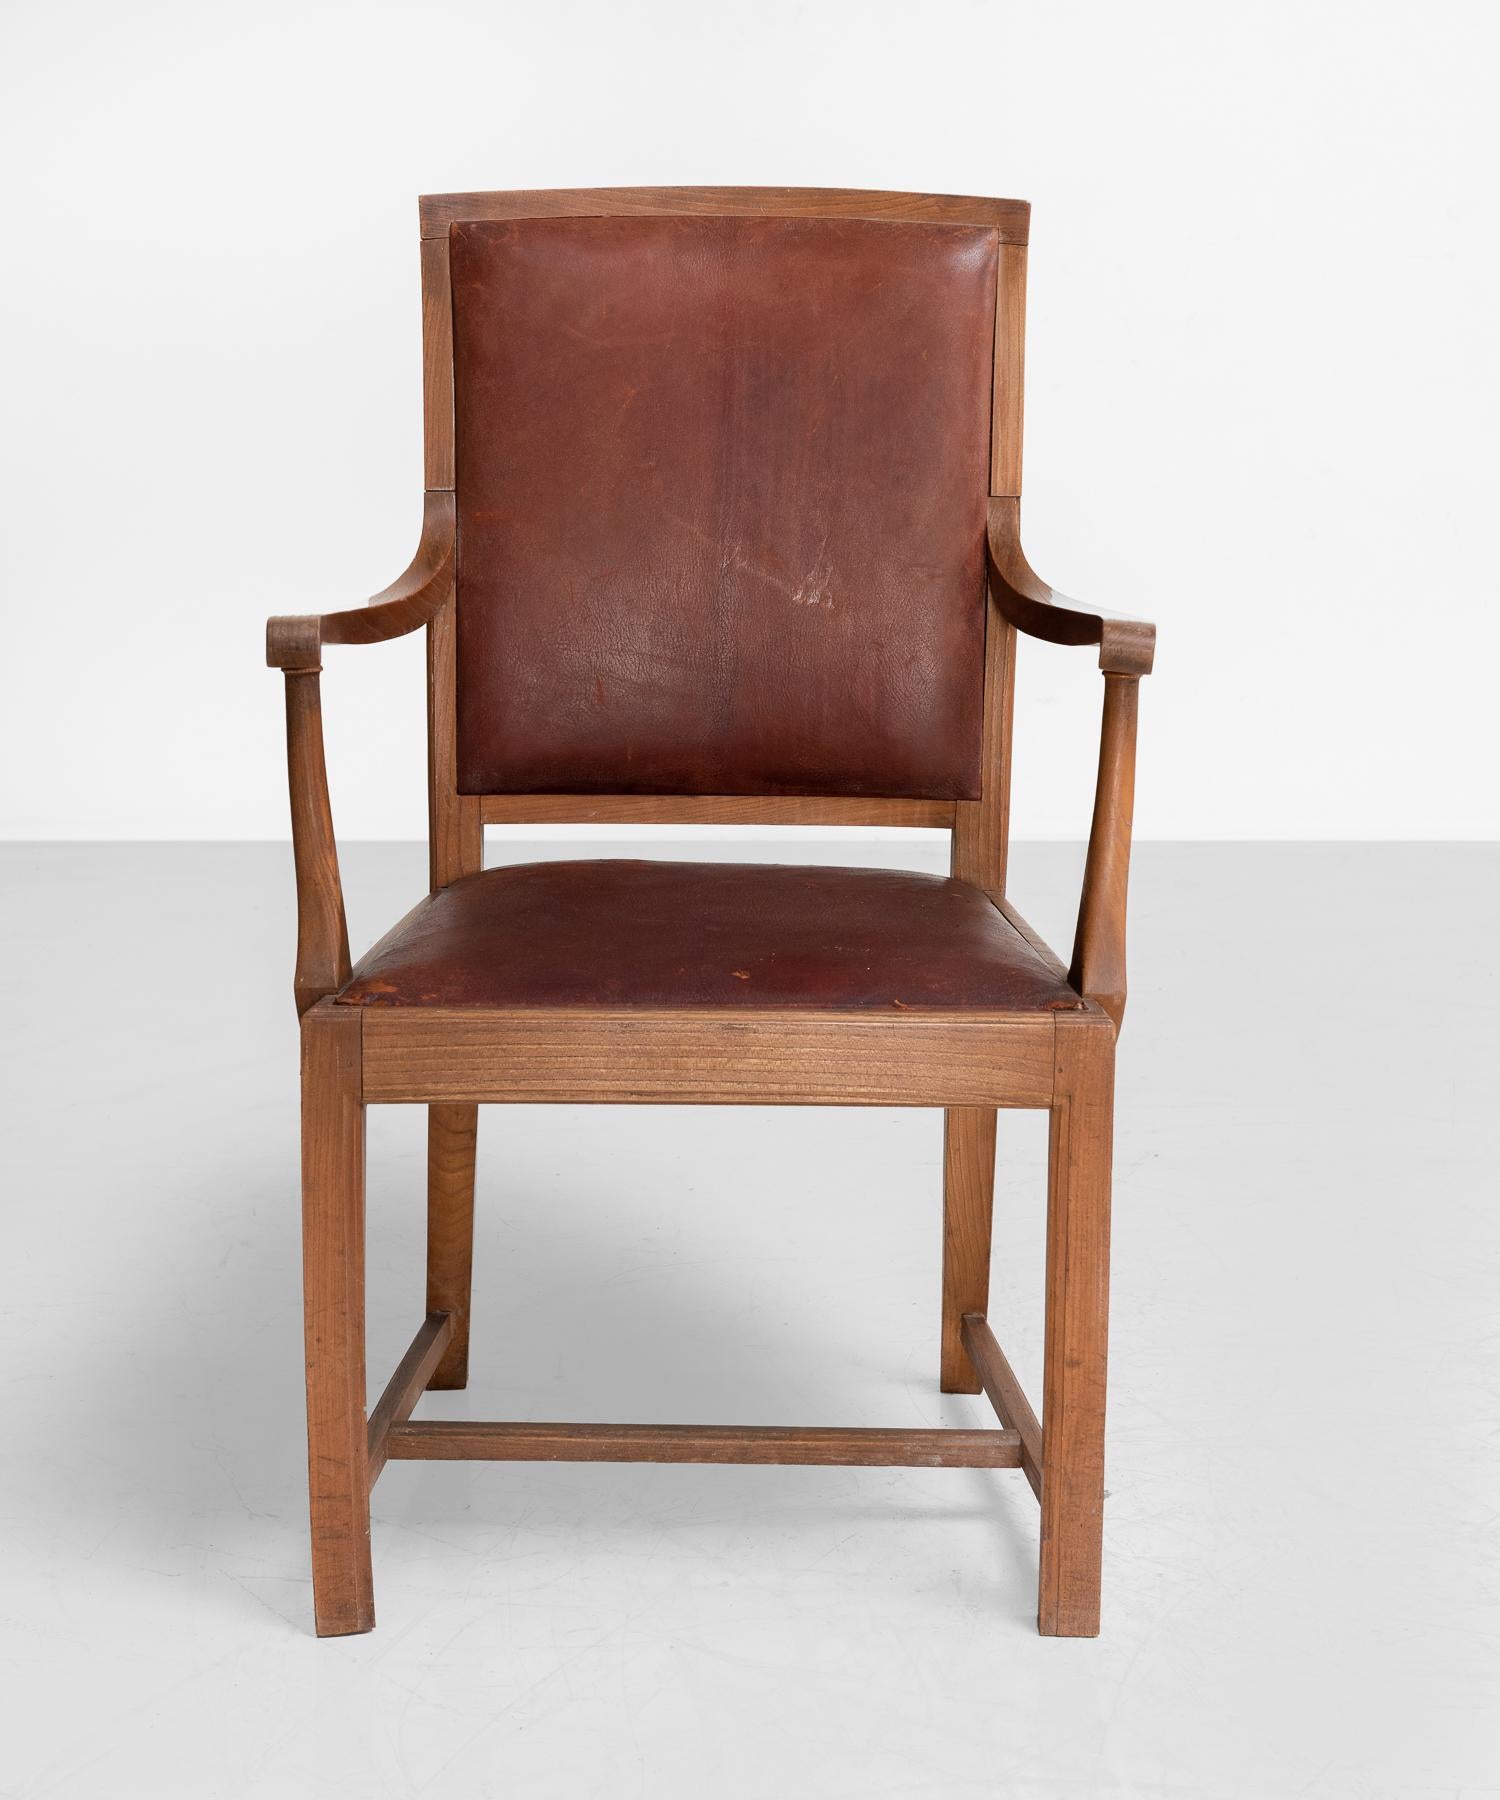 Carved oak and leather armchairs, England, circa 1930.

Well-constructed armchairs with beautifully patinated leather backs and seat.